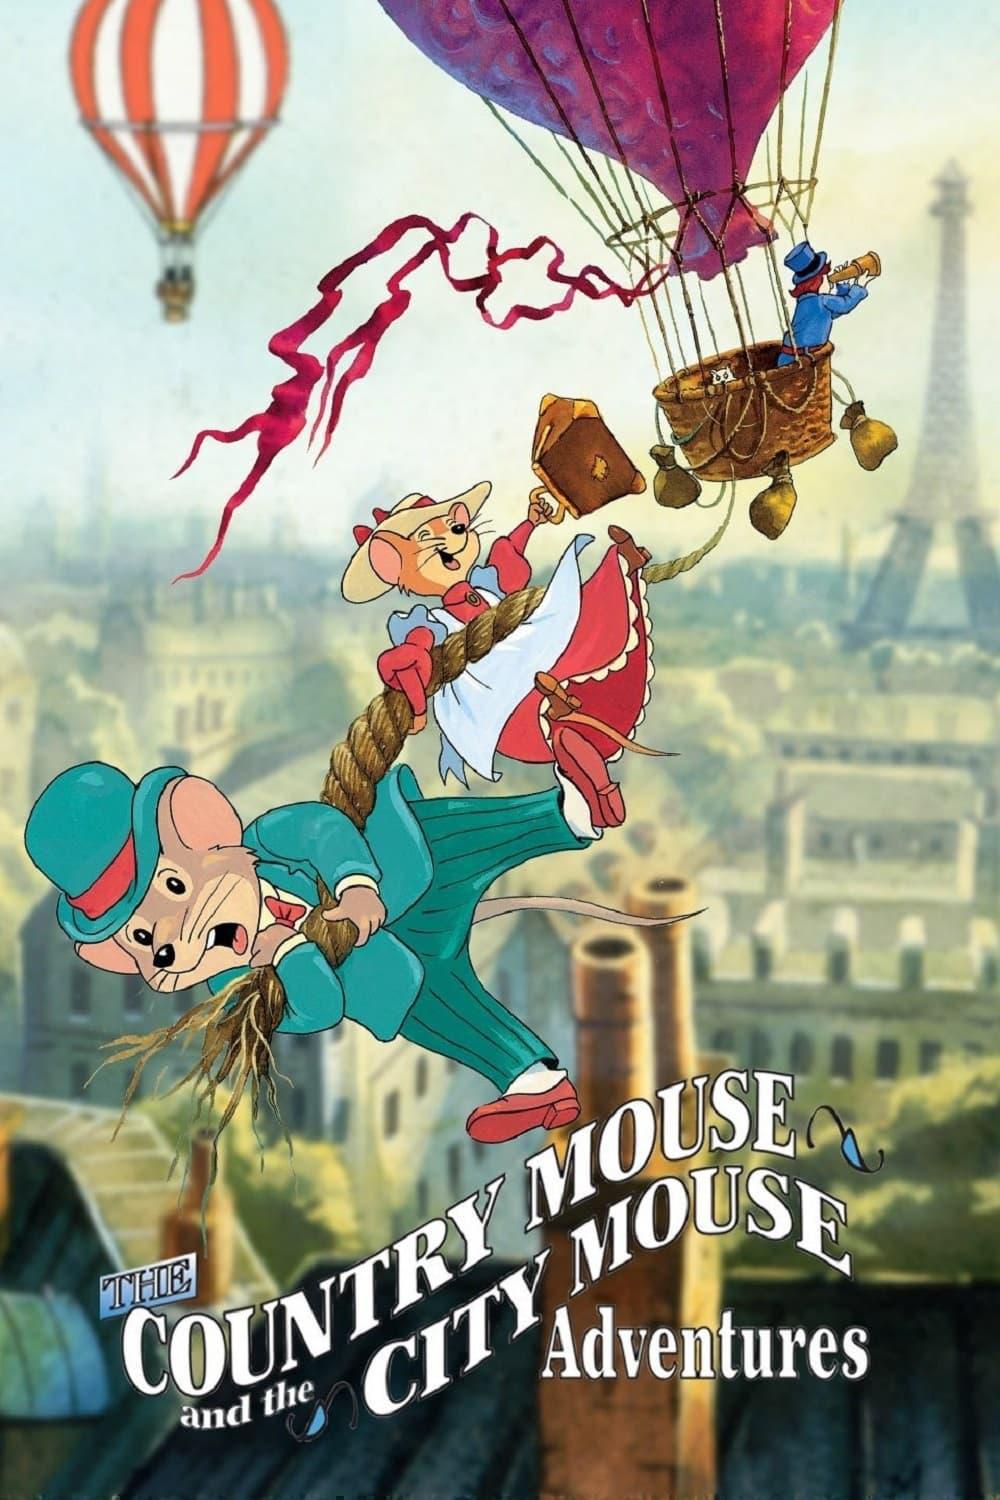 TV ratings for The Country Mouse And The City Mouse Adventures (Souris Des Villes, Souris Des Champs) in the United Kingdom. France 3 TV series